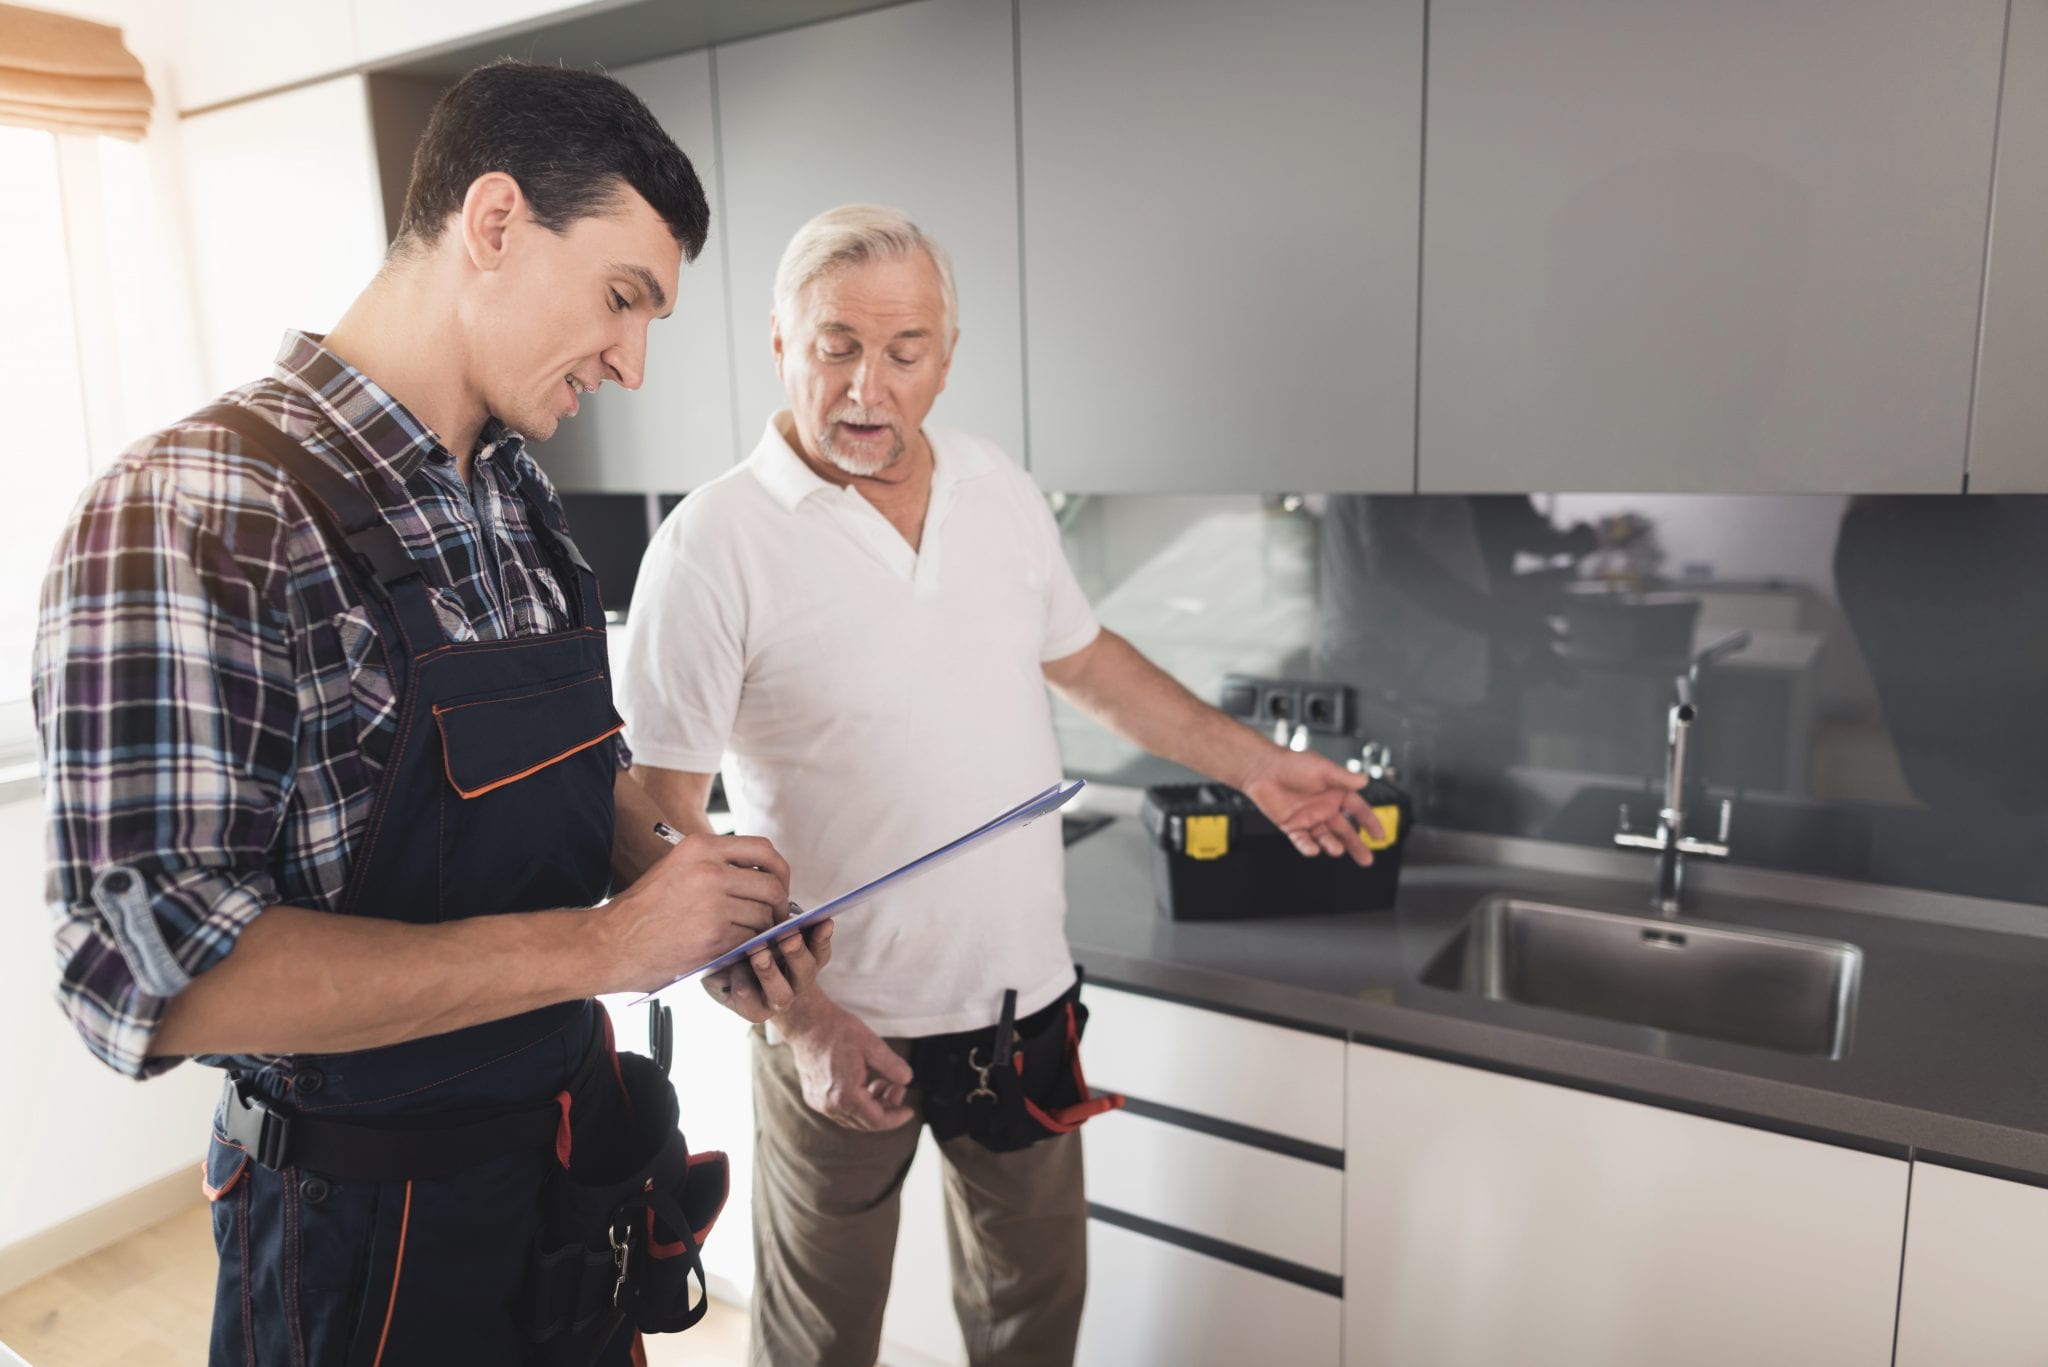 What is Involved in a Whole-House Plumbing Inspection?